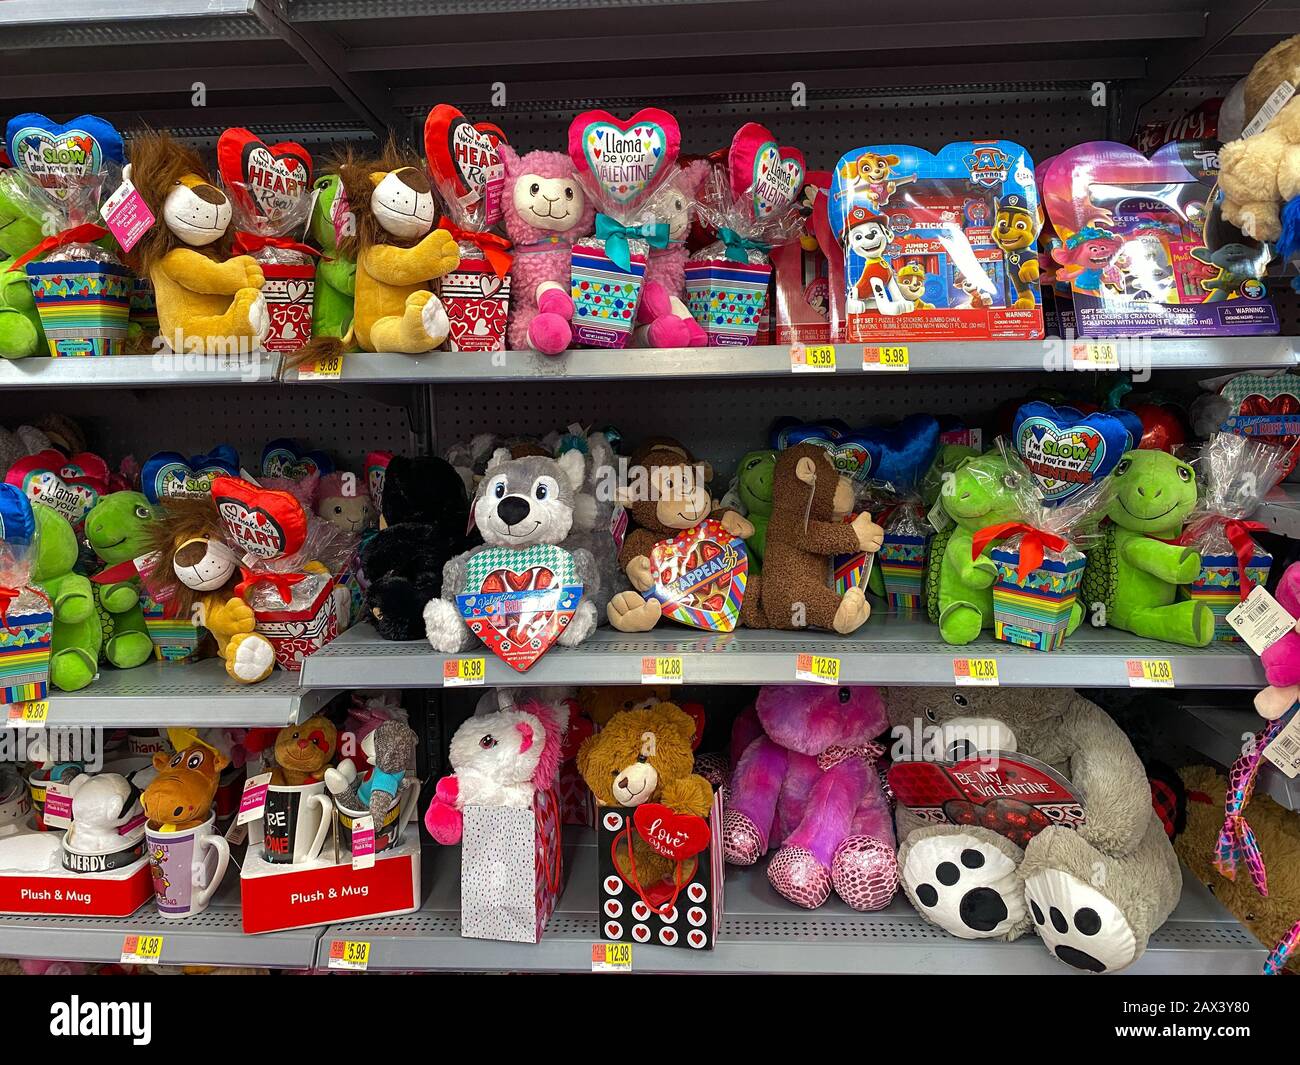 Orlando,FL/USA-2/6/20: A Valentines display at Walmart of stuffed animals  with hearts ready to be purchased as Valentines Day gifts Stock Photo -  Alamy